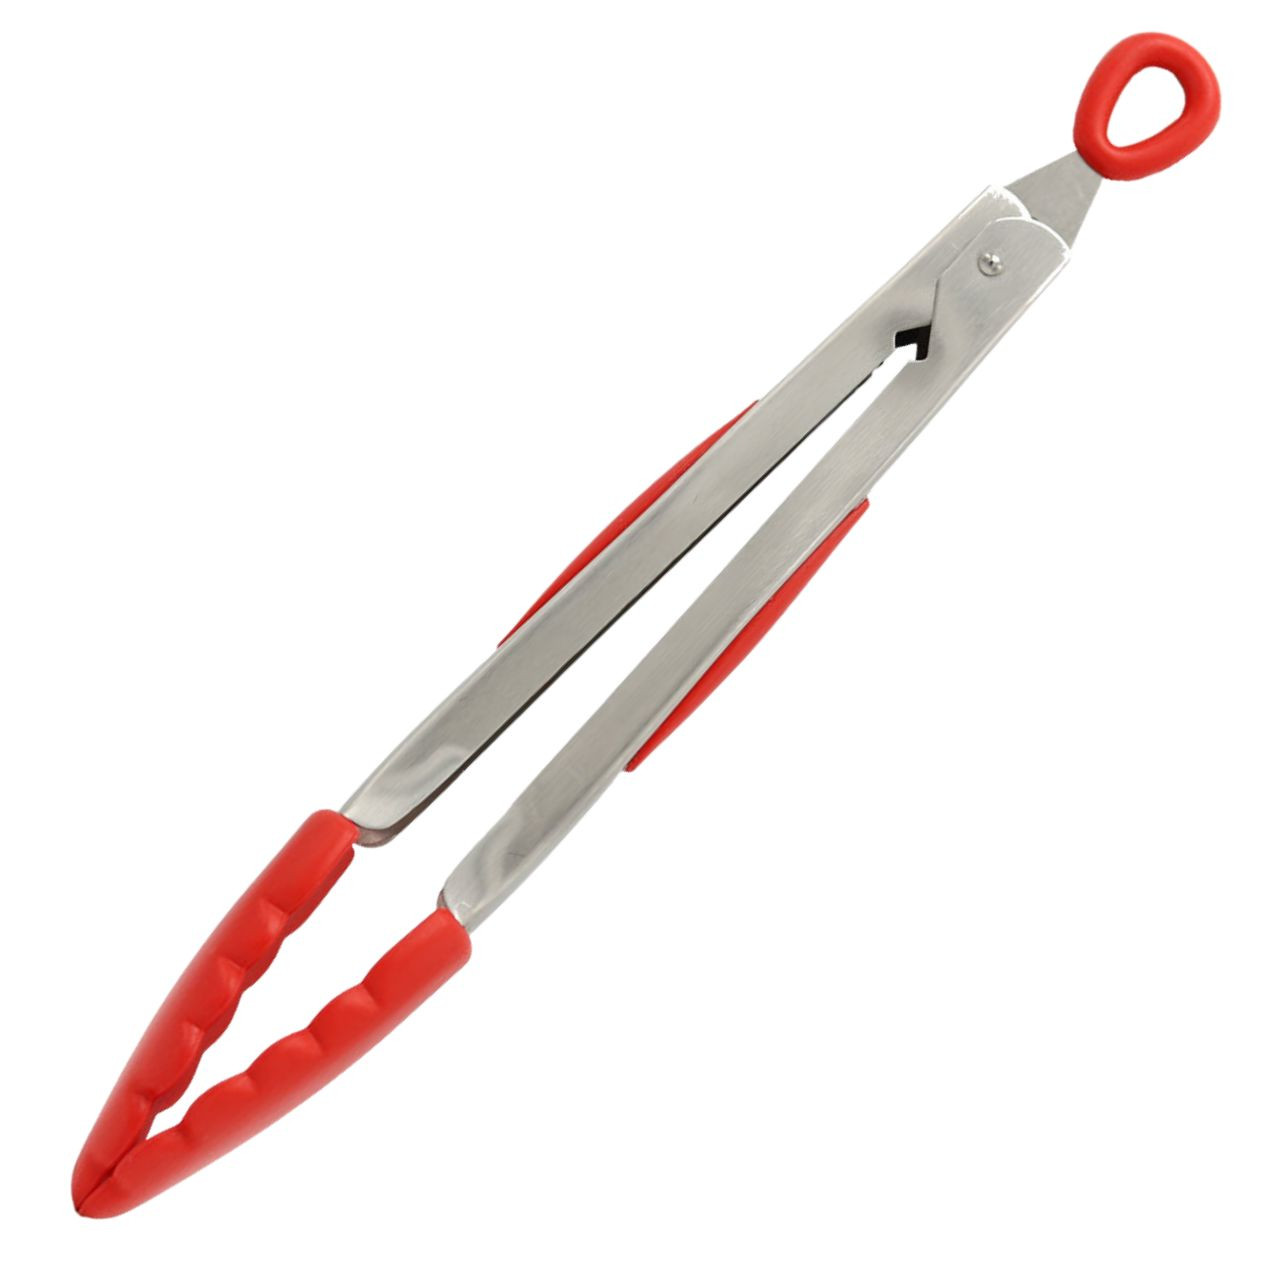 Mastrad Stainless Steel Silicone Kitchen Tongs